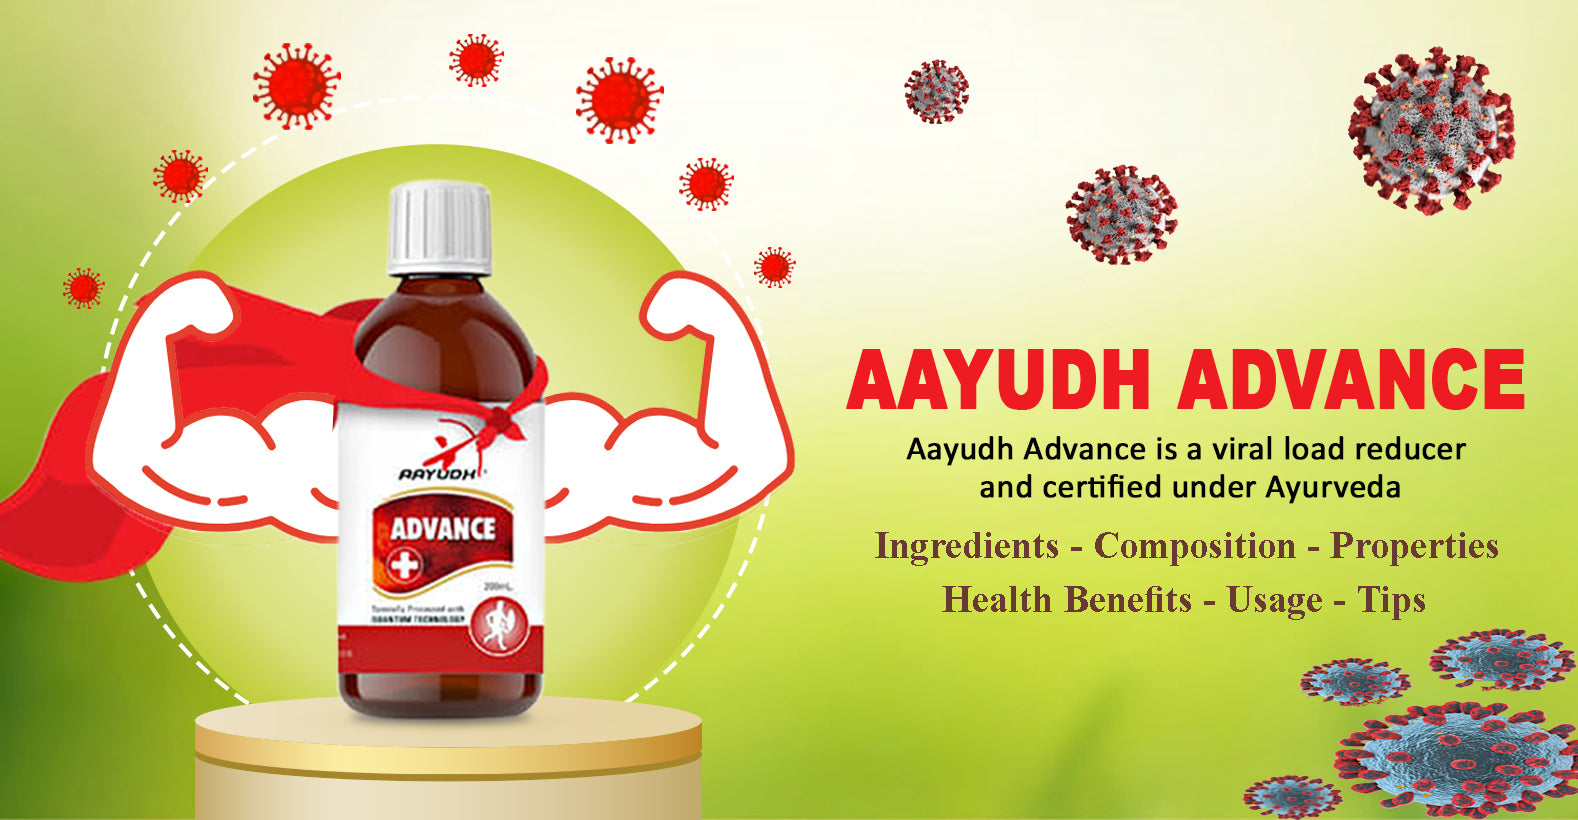 Aayudh Advance - Ingredients, Composition, Properties, Health Benefits, Usage, Tips